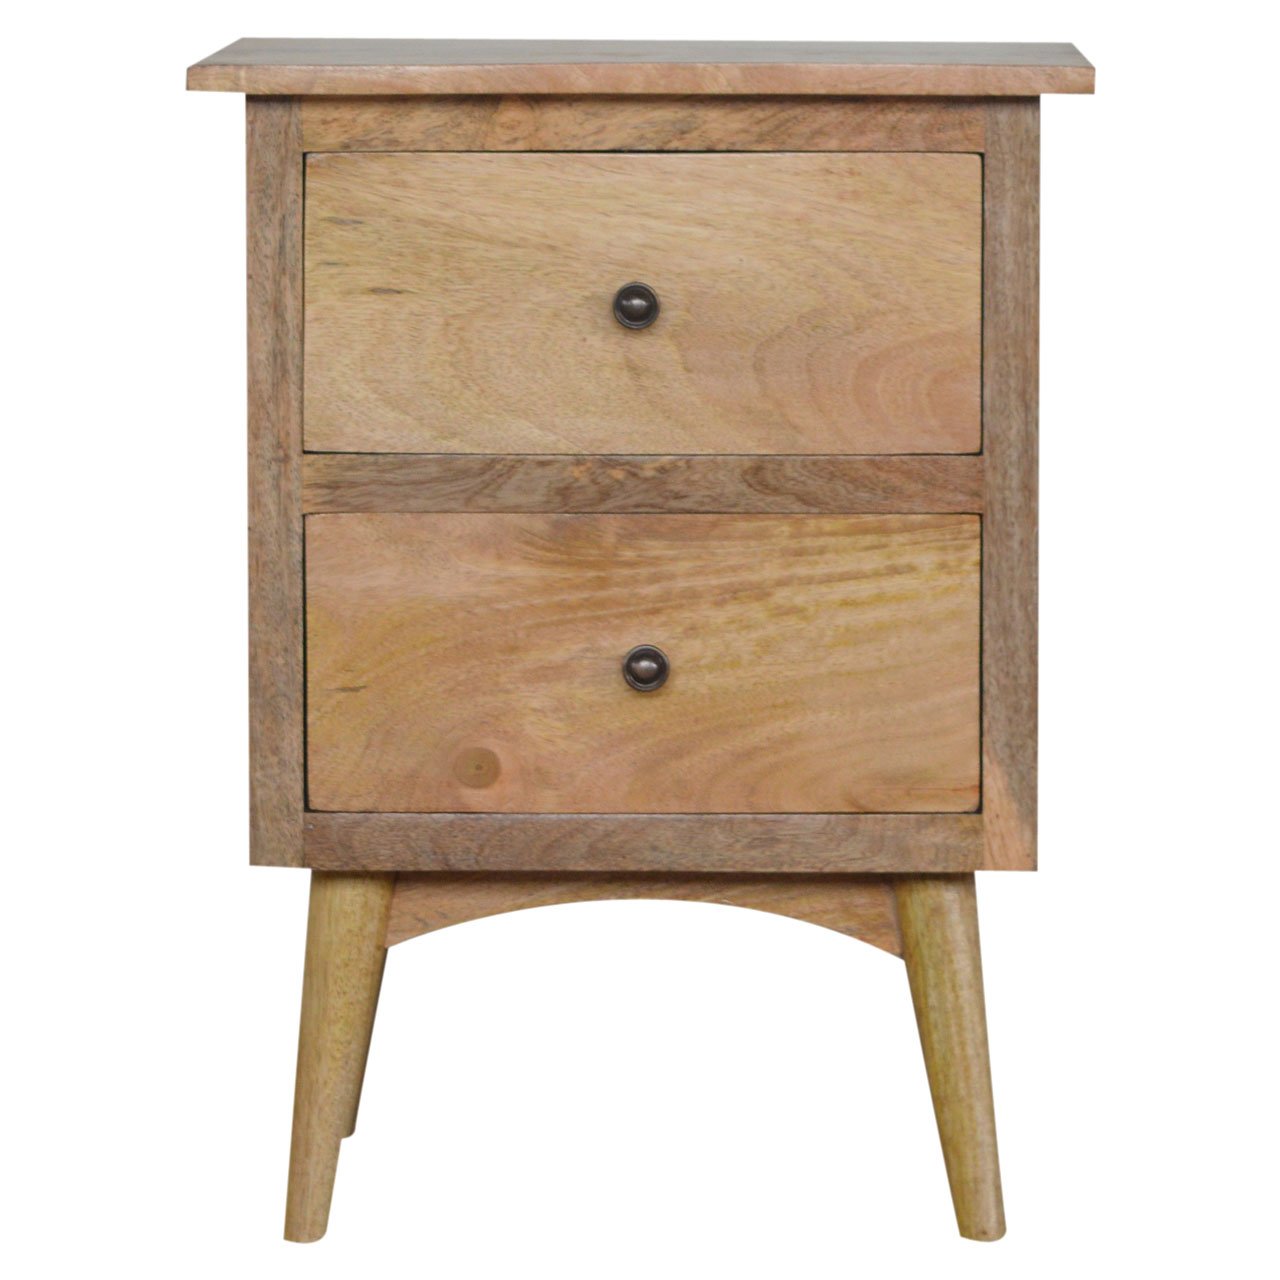 View Nordic Style Bedside with 2 Drawers information